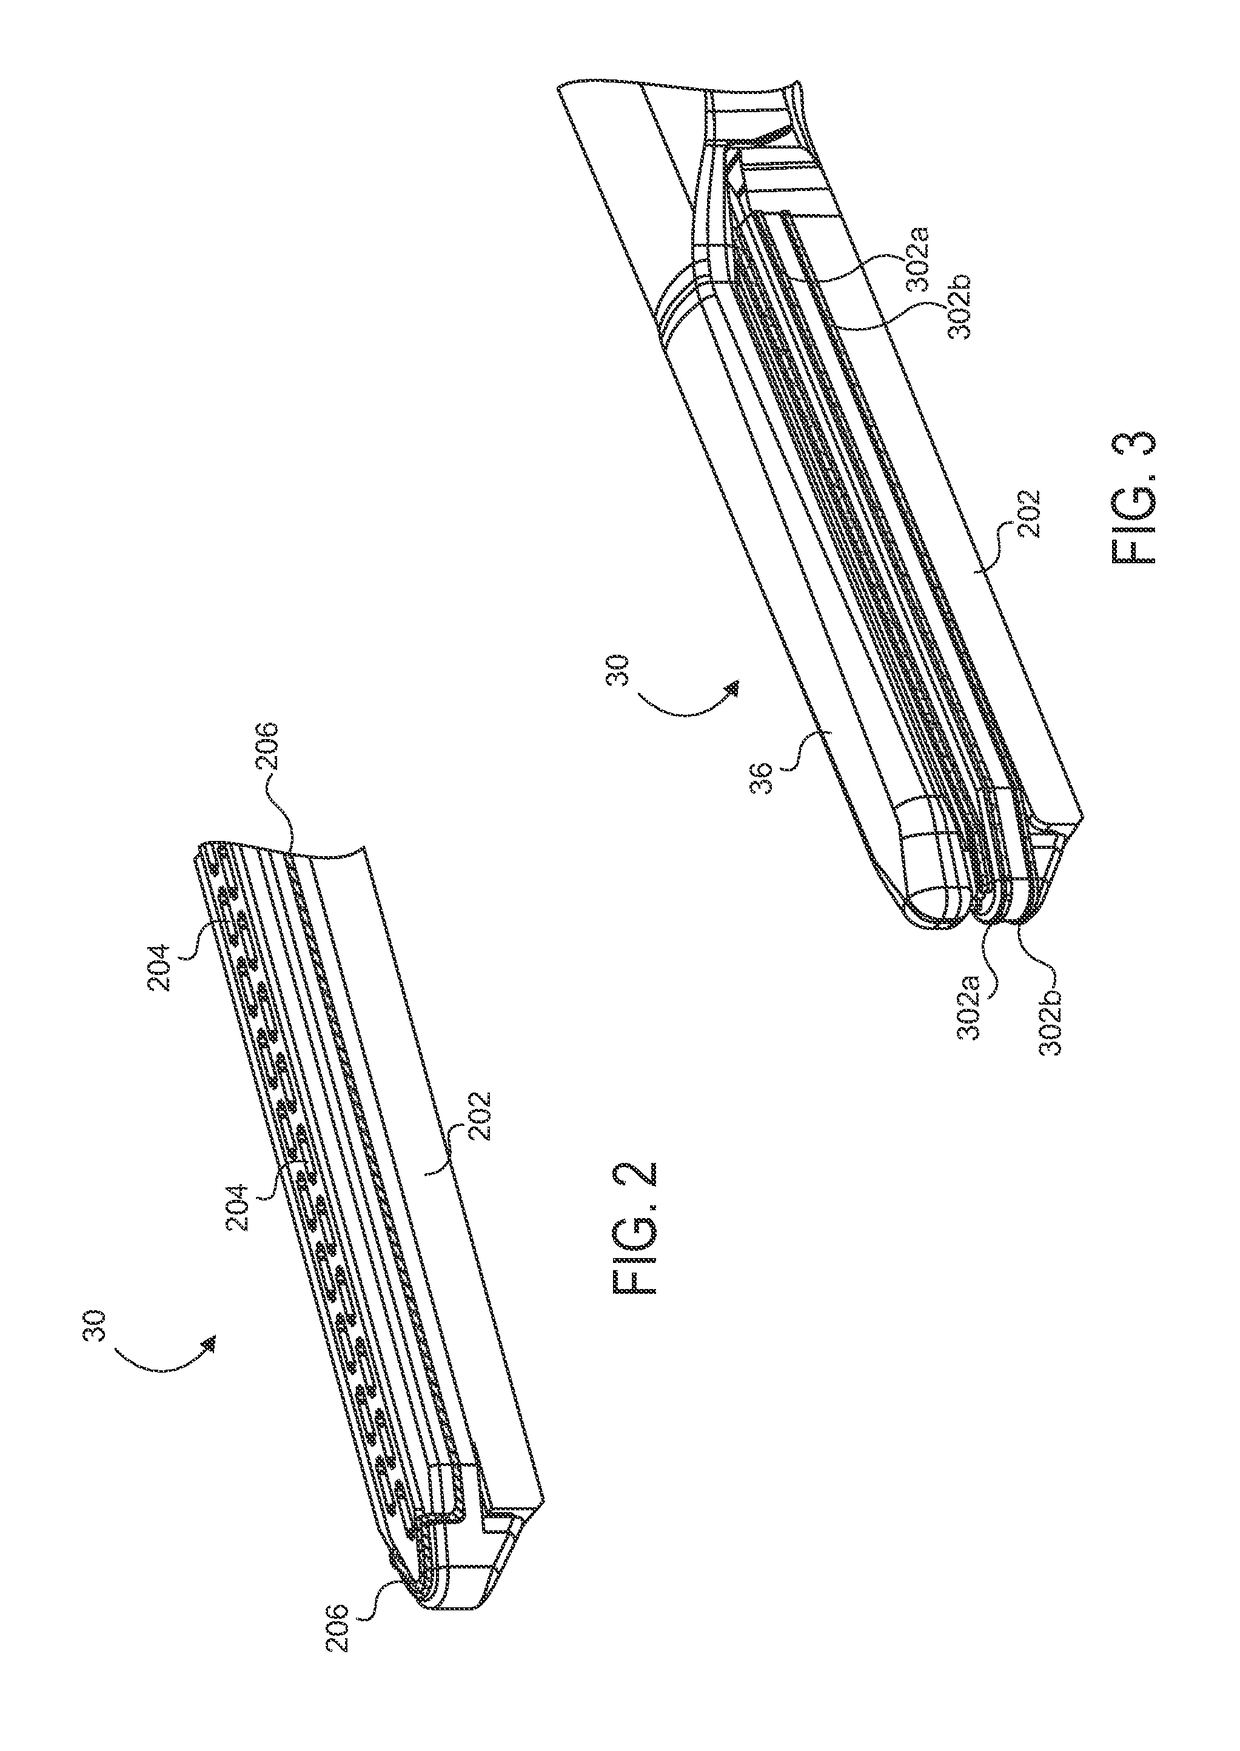 Electrode wiping surgical device